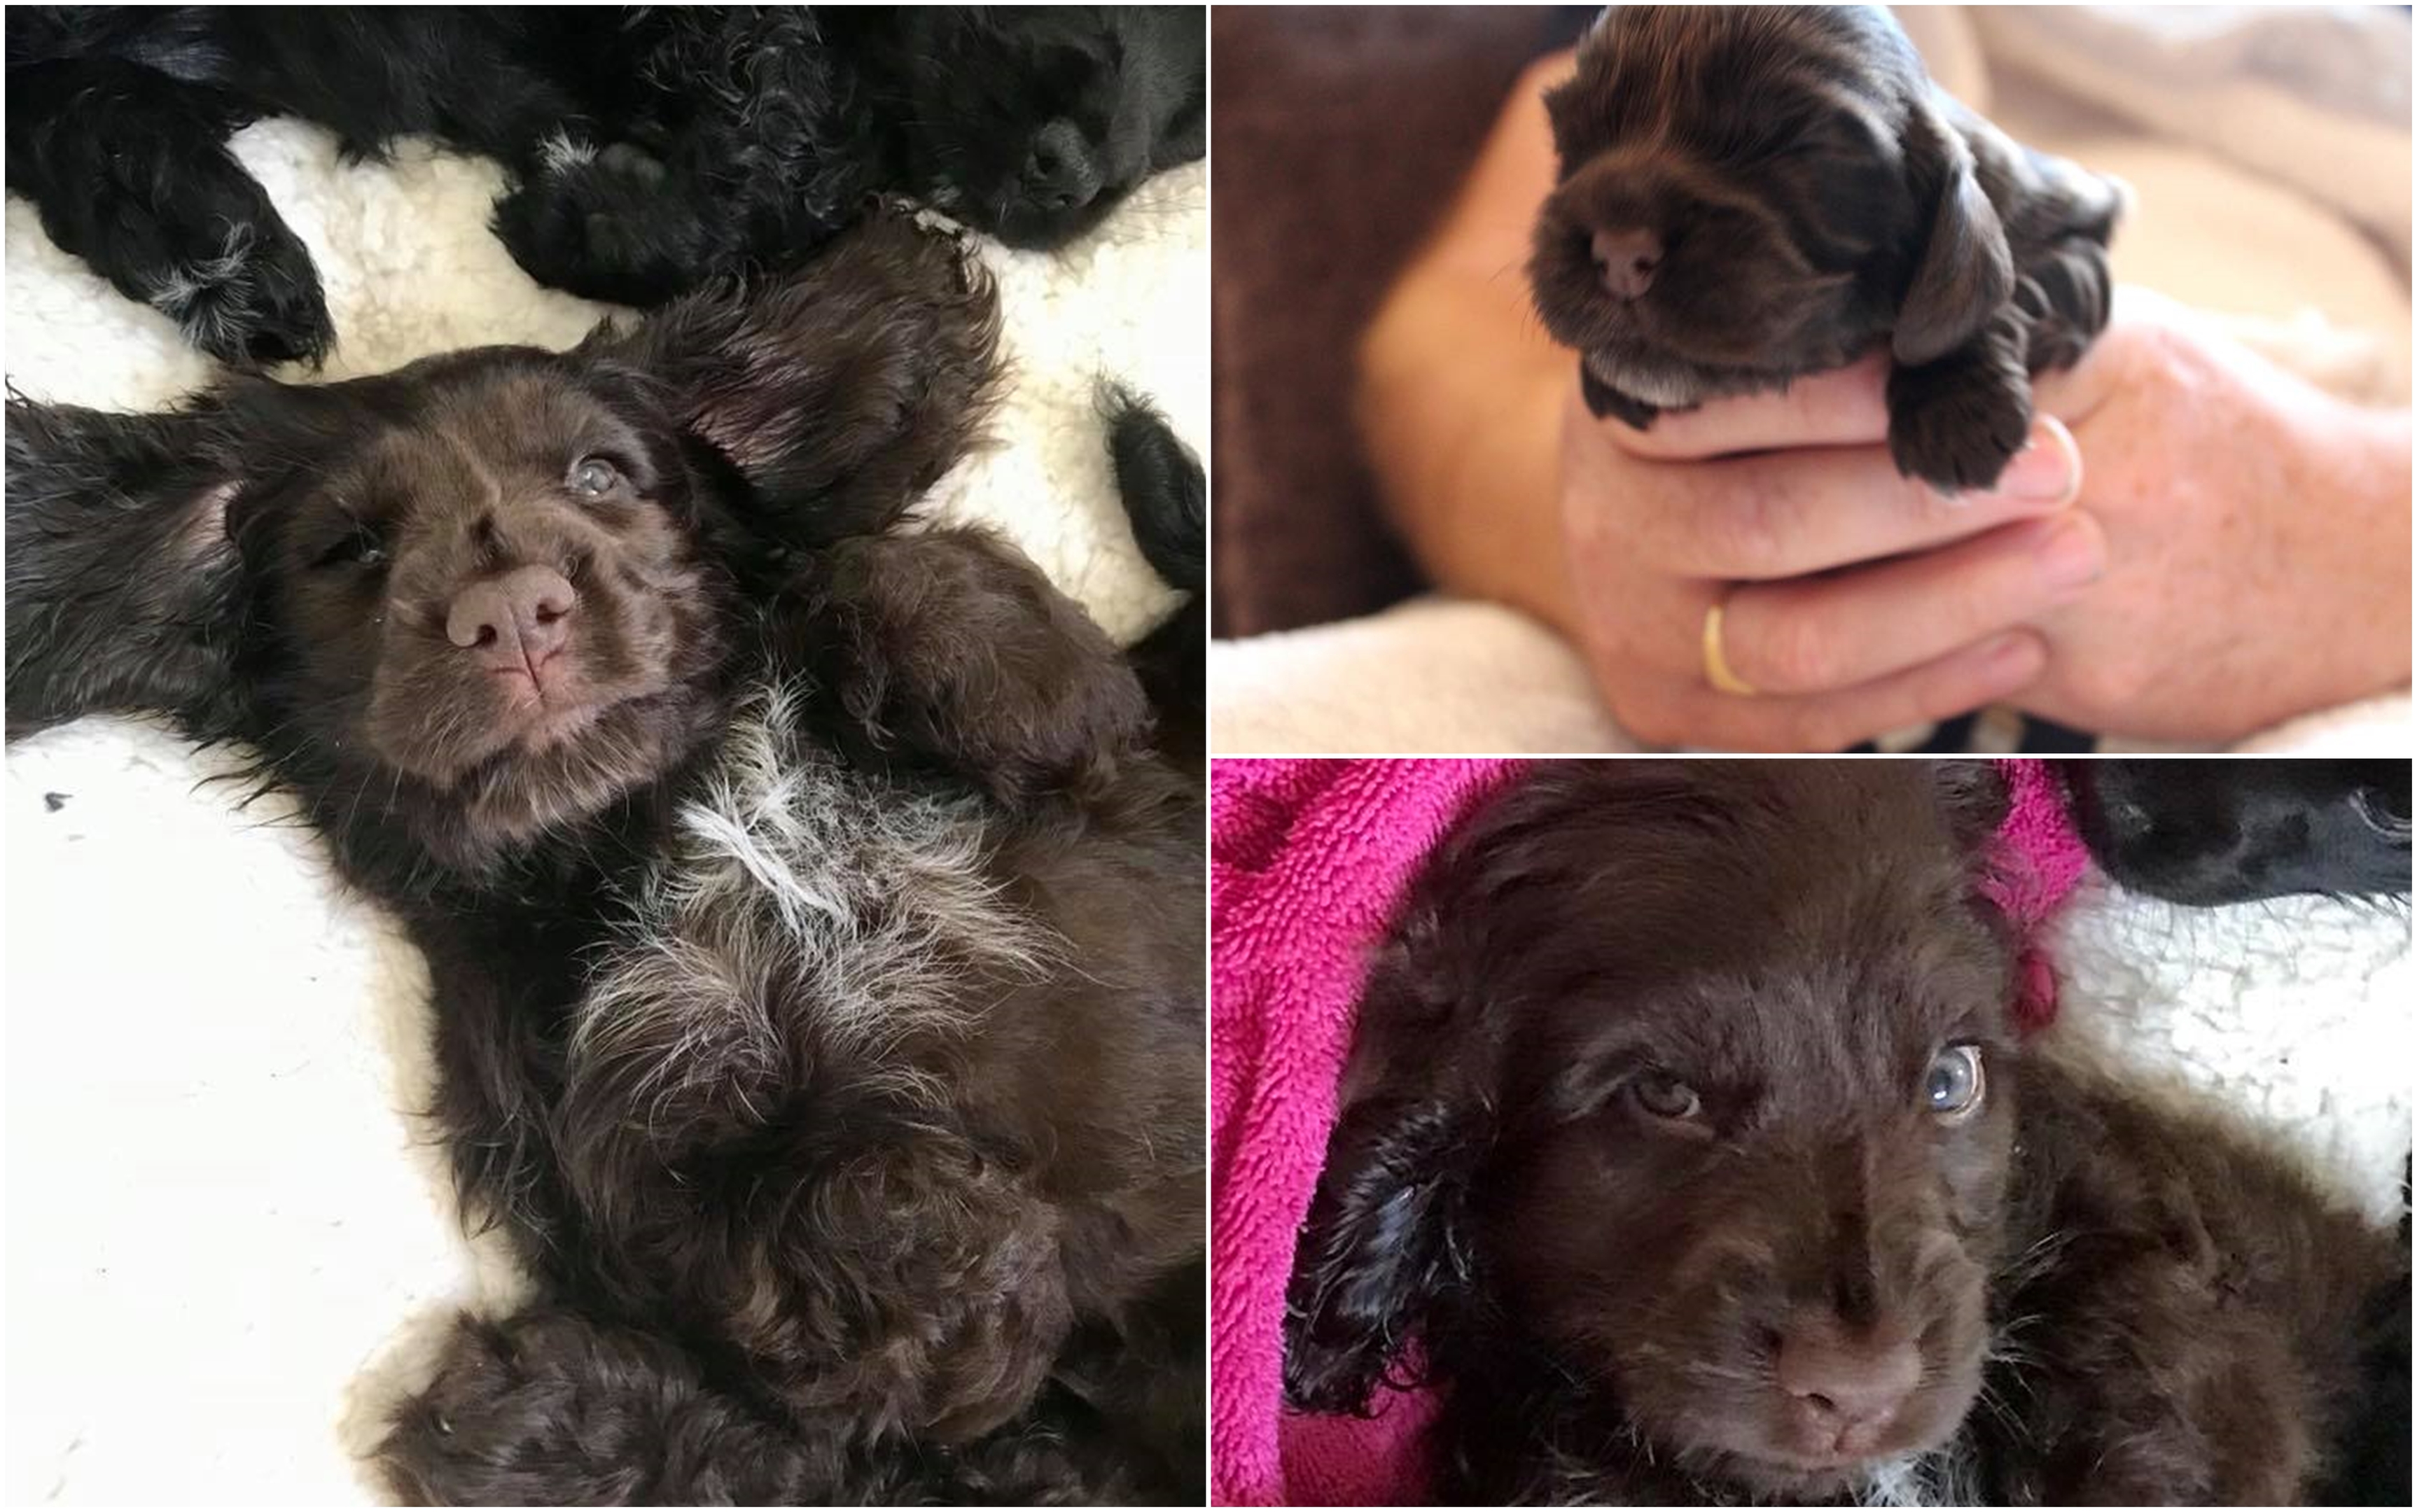 Photos of Poppy from her short life.